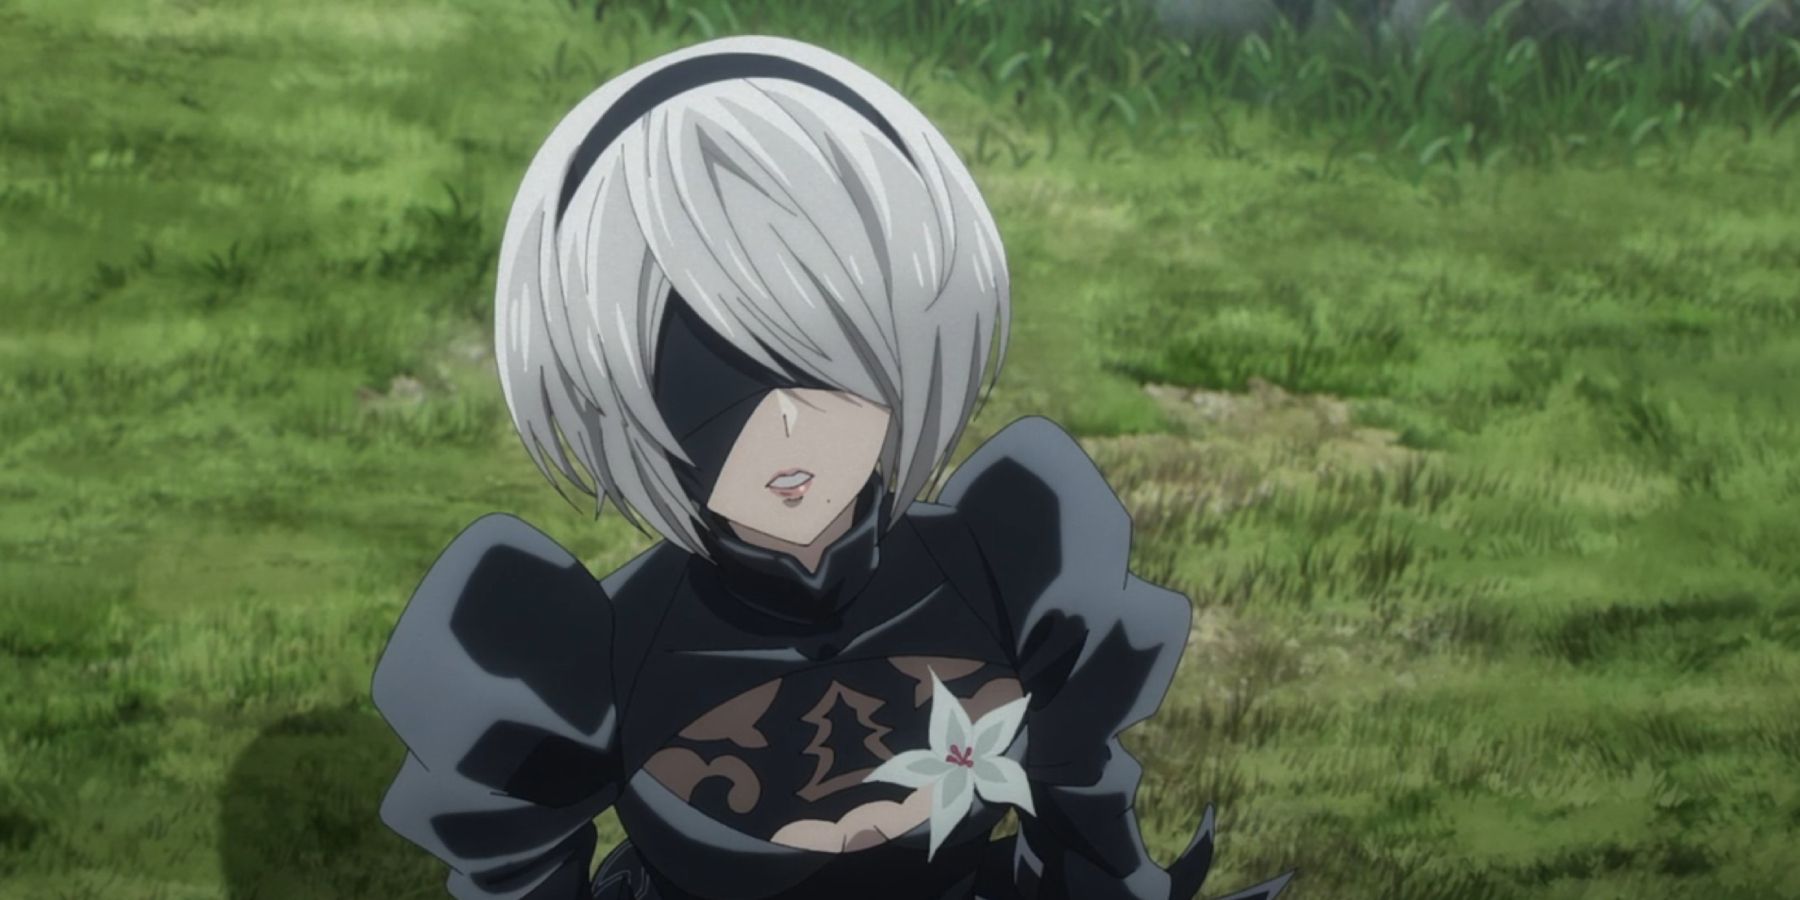 Nier: Automata Ver1.1a anime 2B with flower on chest